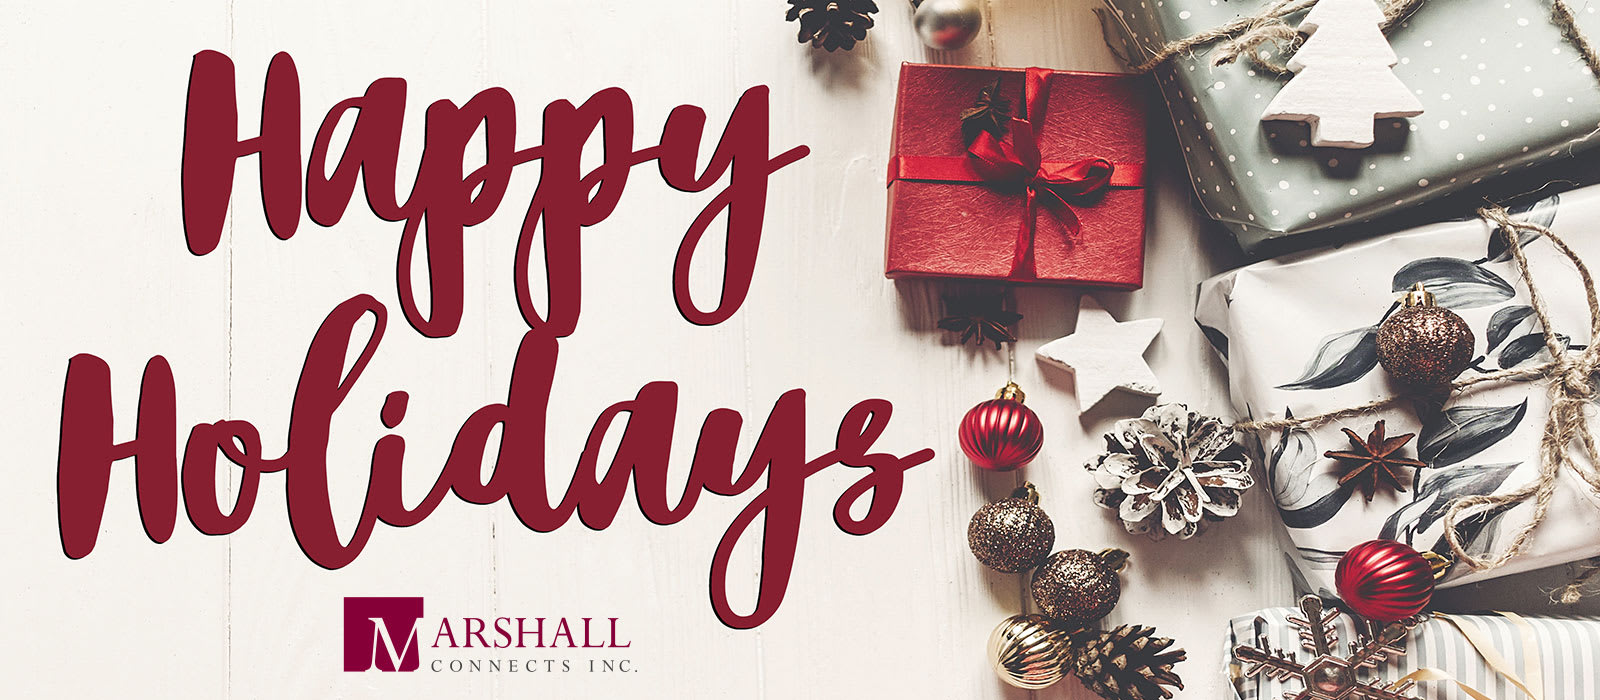 Season's Greetings From Marshall Connects